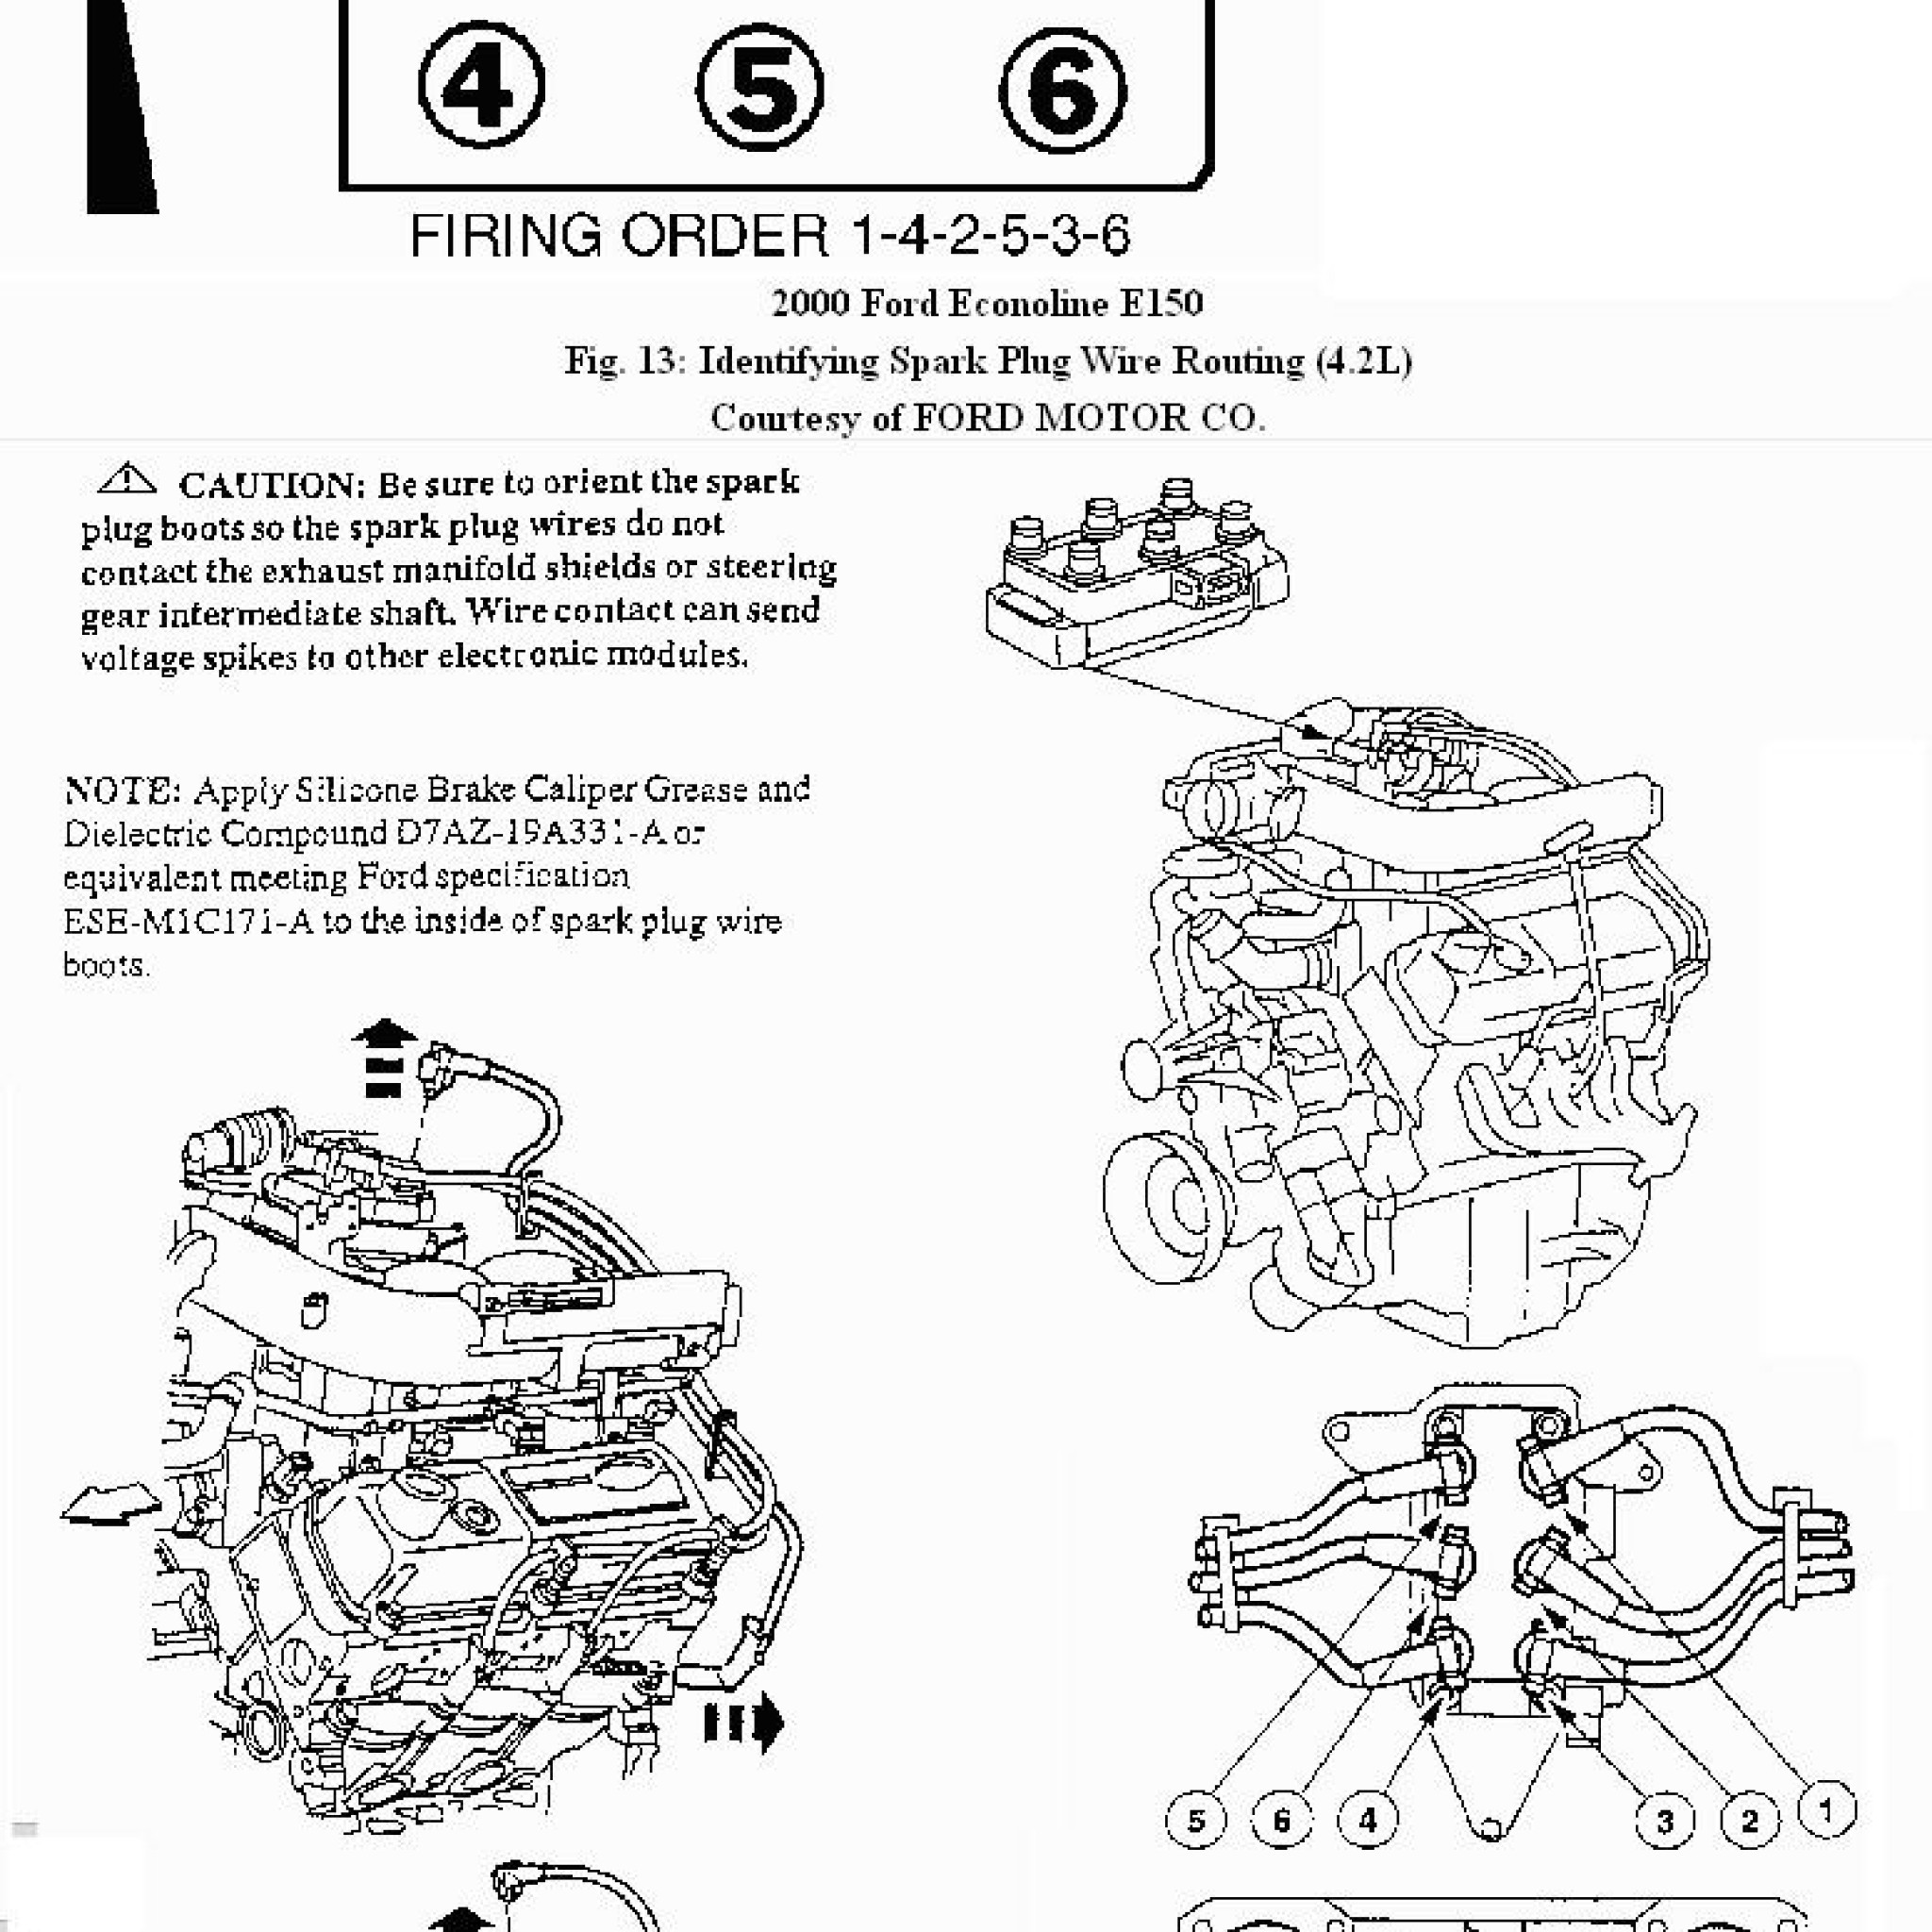 2007 Ford F150 4.2 L Firing Order | Wiring and Printable